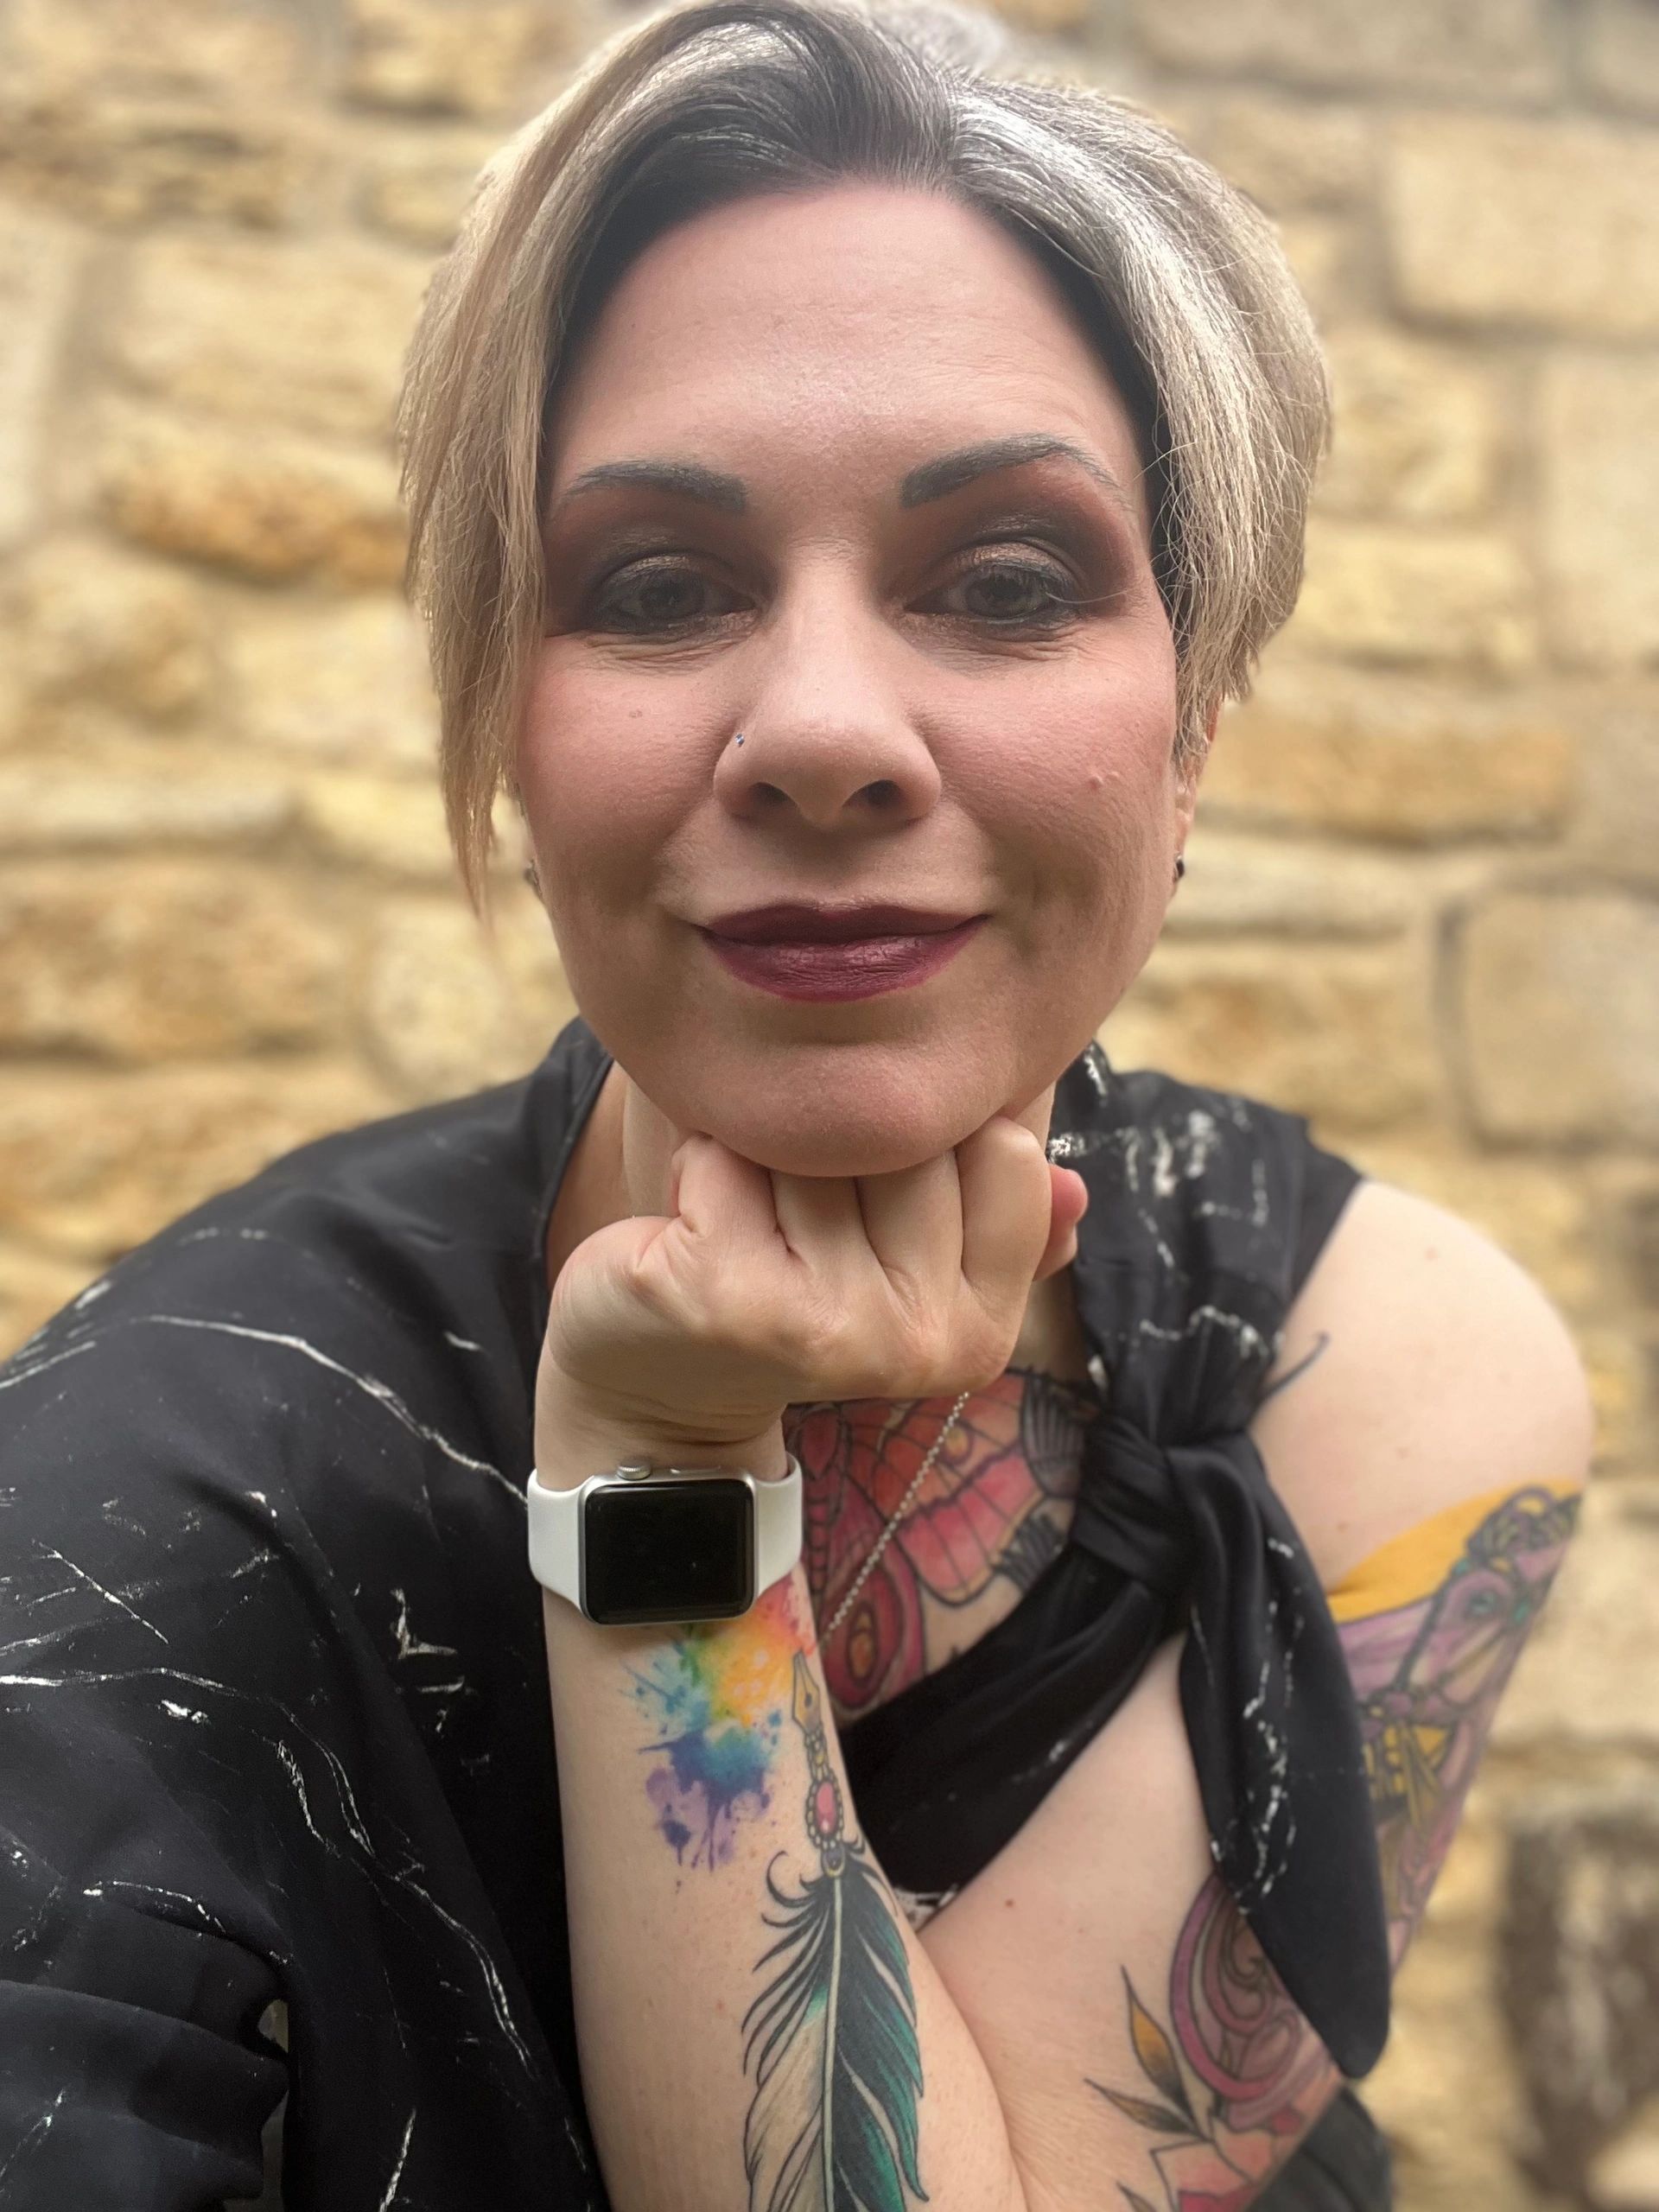 A smiling woman with short hair and tattoos. Writer Maddy T Thomas. 